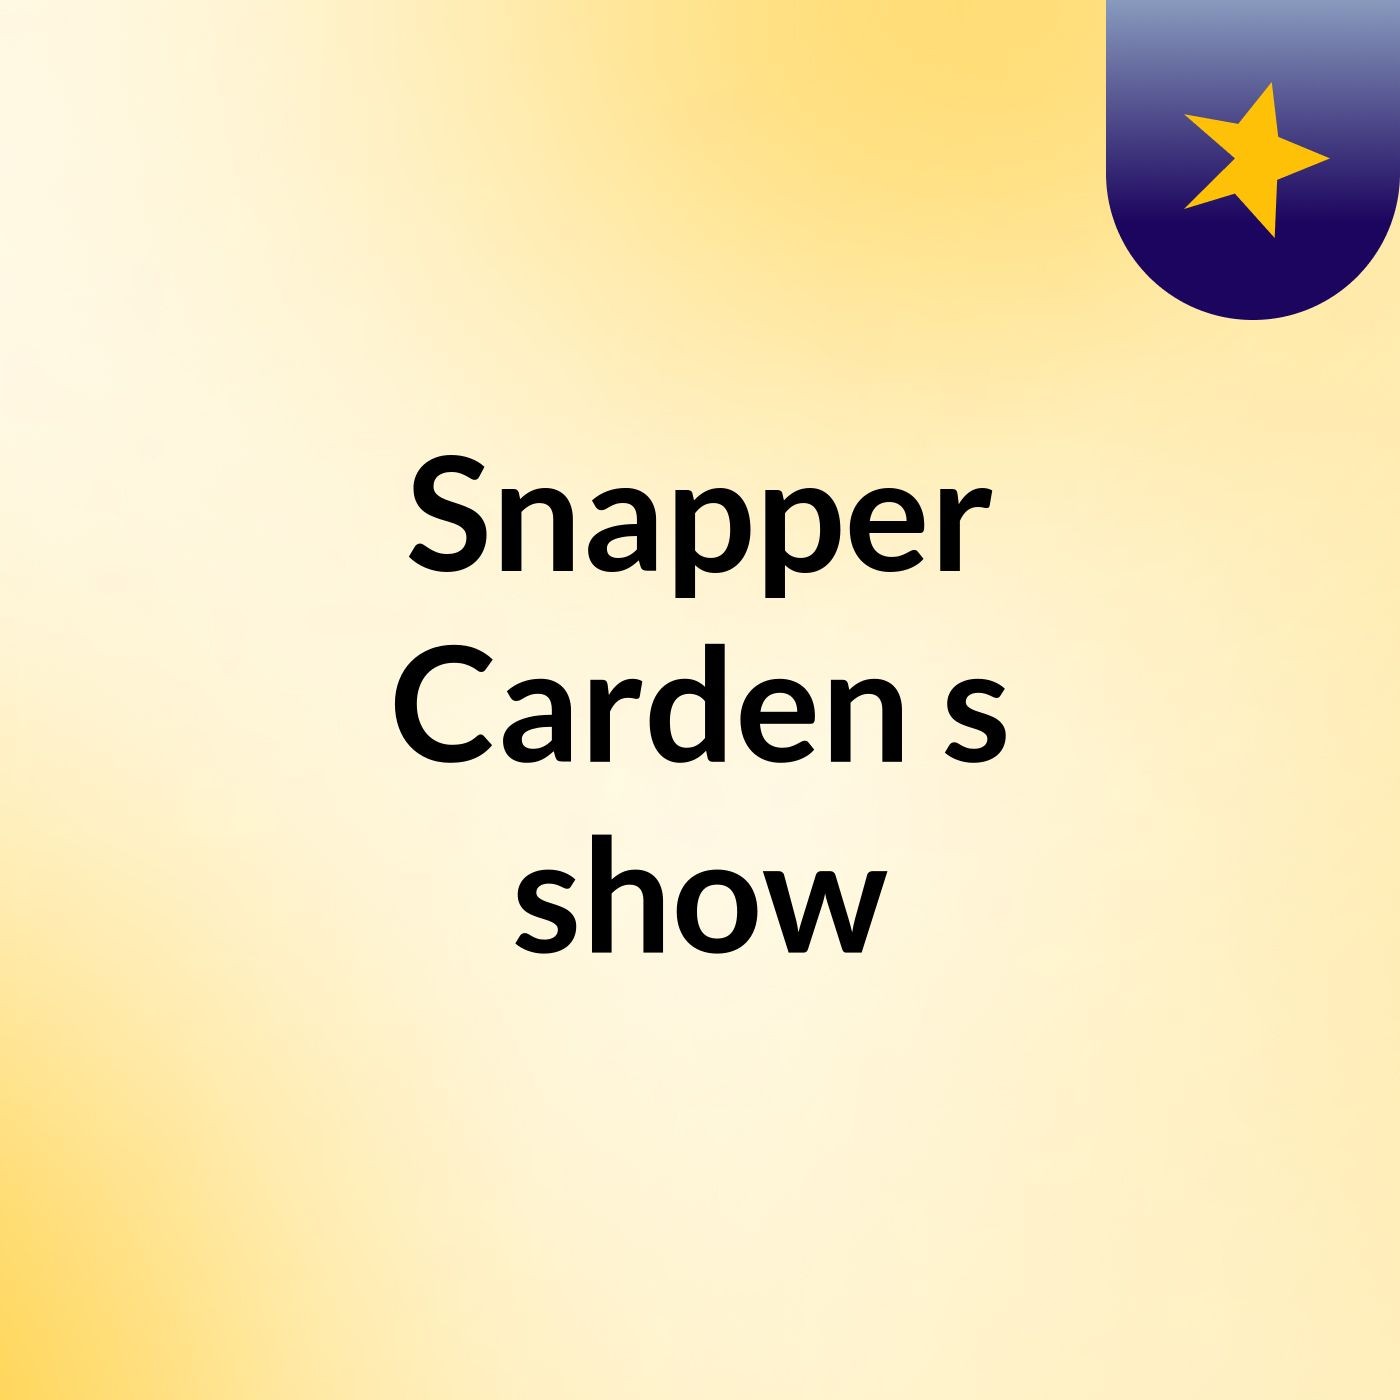 Snapper Carden's show